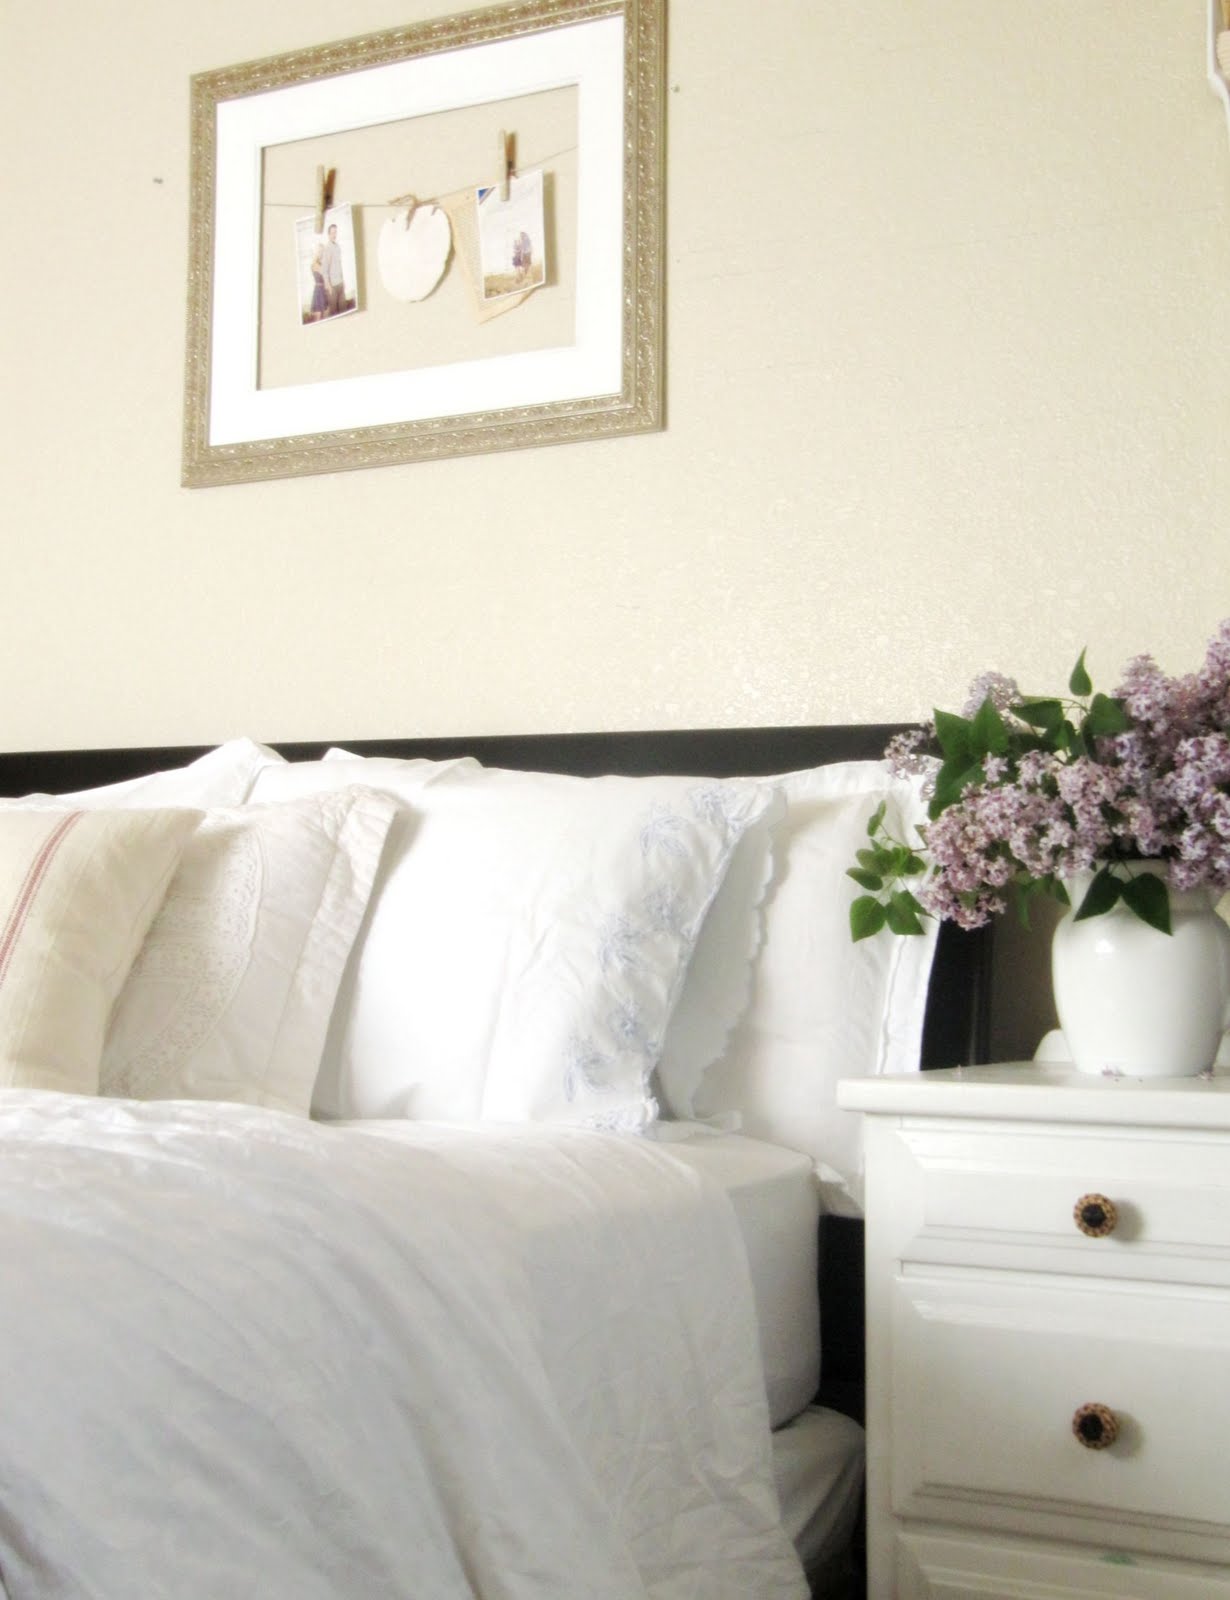 Lilacs:  An Instant Room Freshener